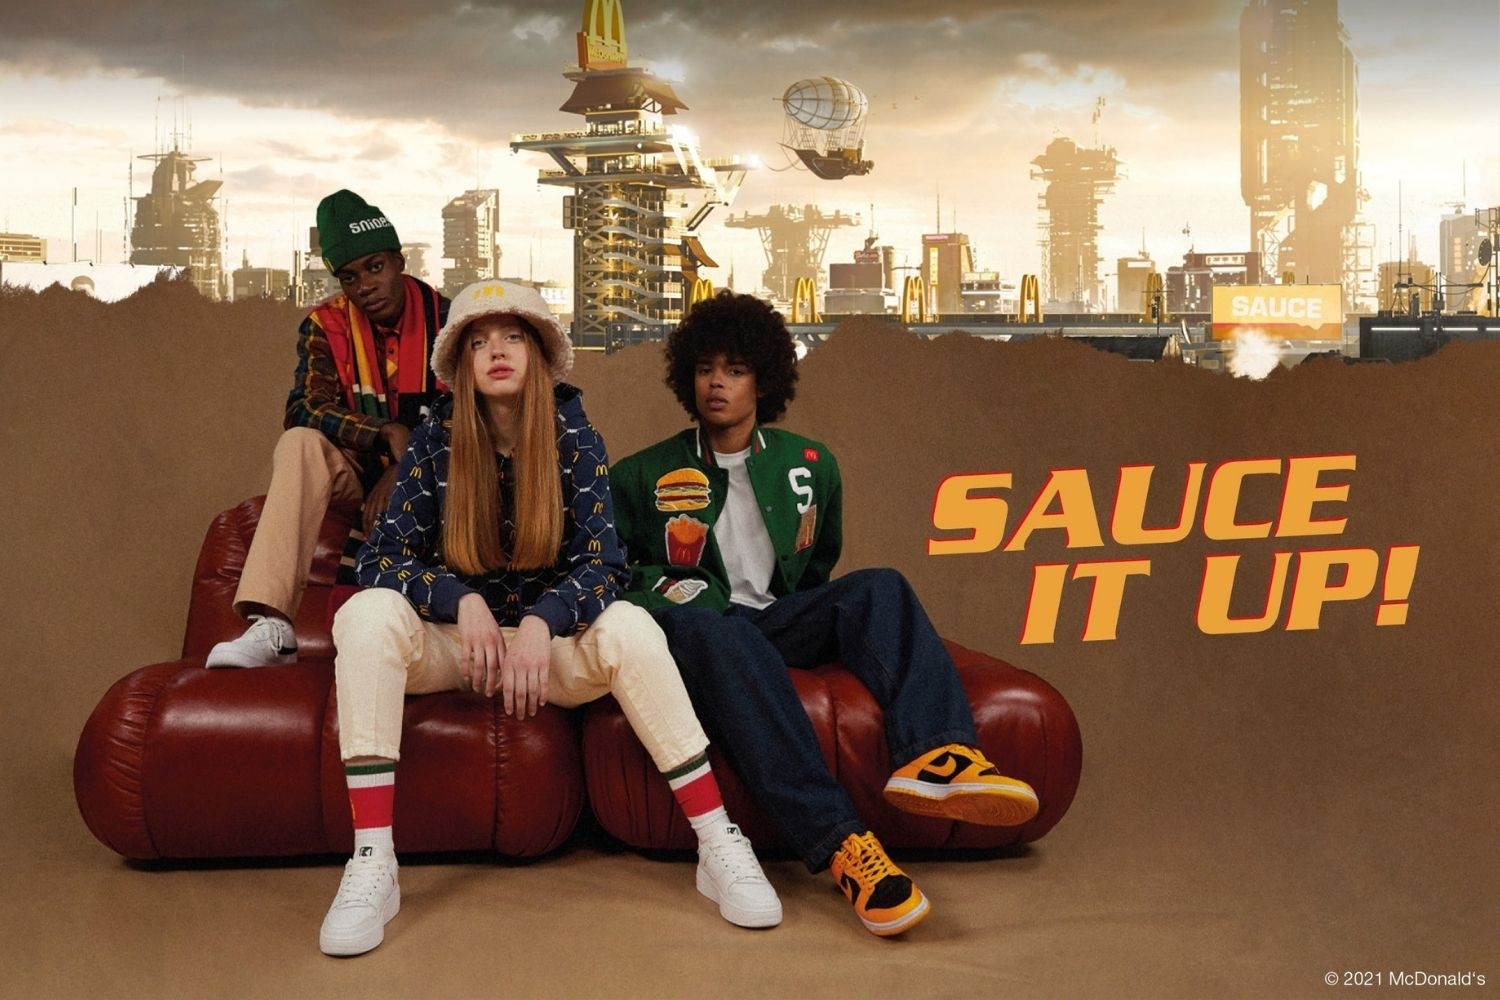 Sauce it up with the new Snipes x Mcdonalds collection